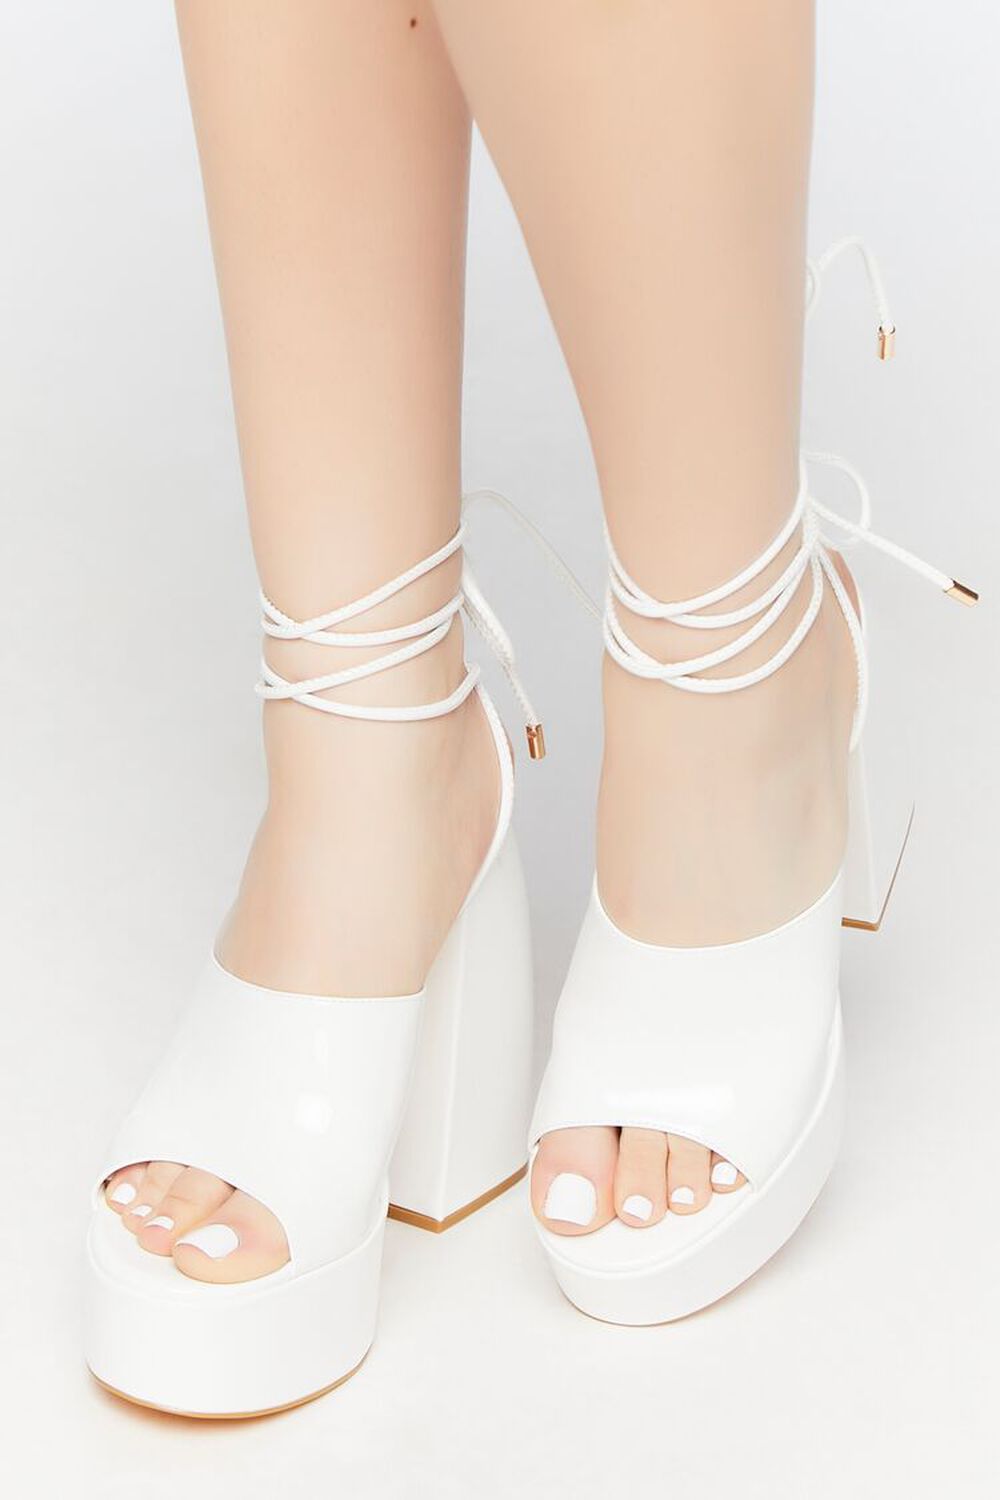 WHITE Faux Patent Leather Lace-Up Heels, image 1